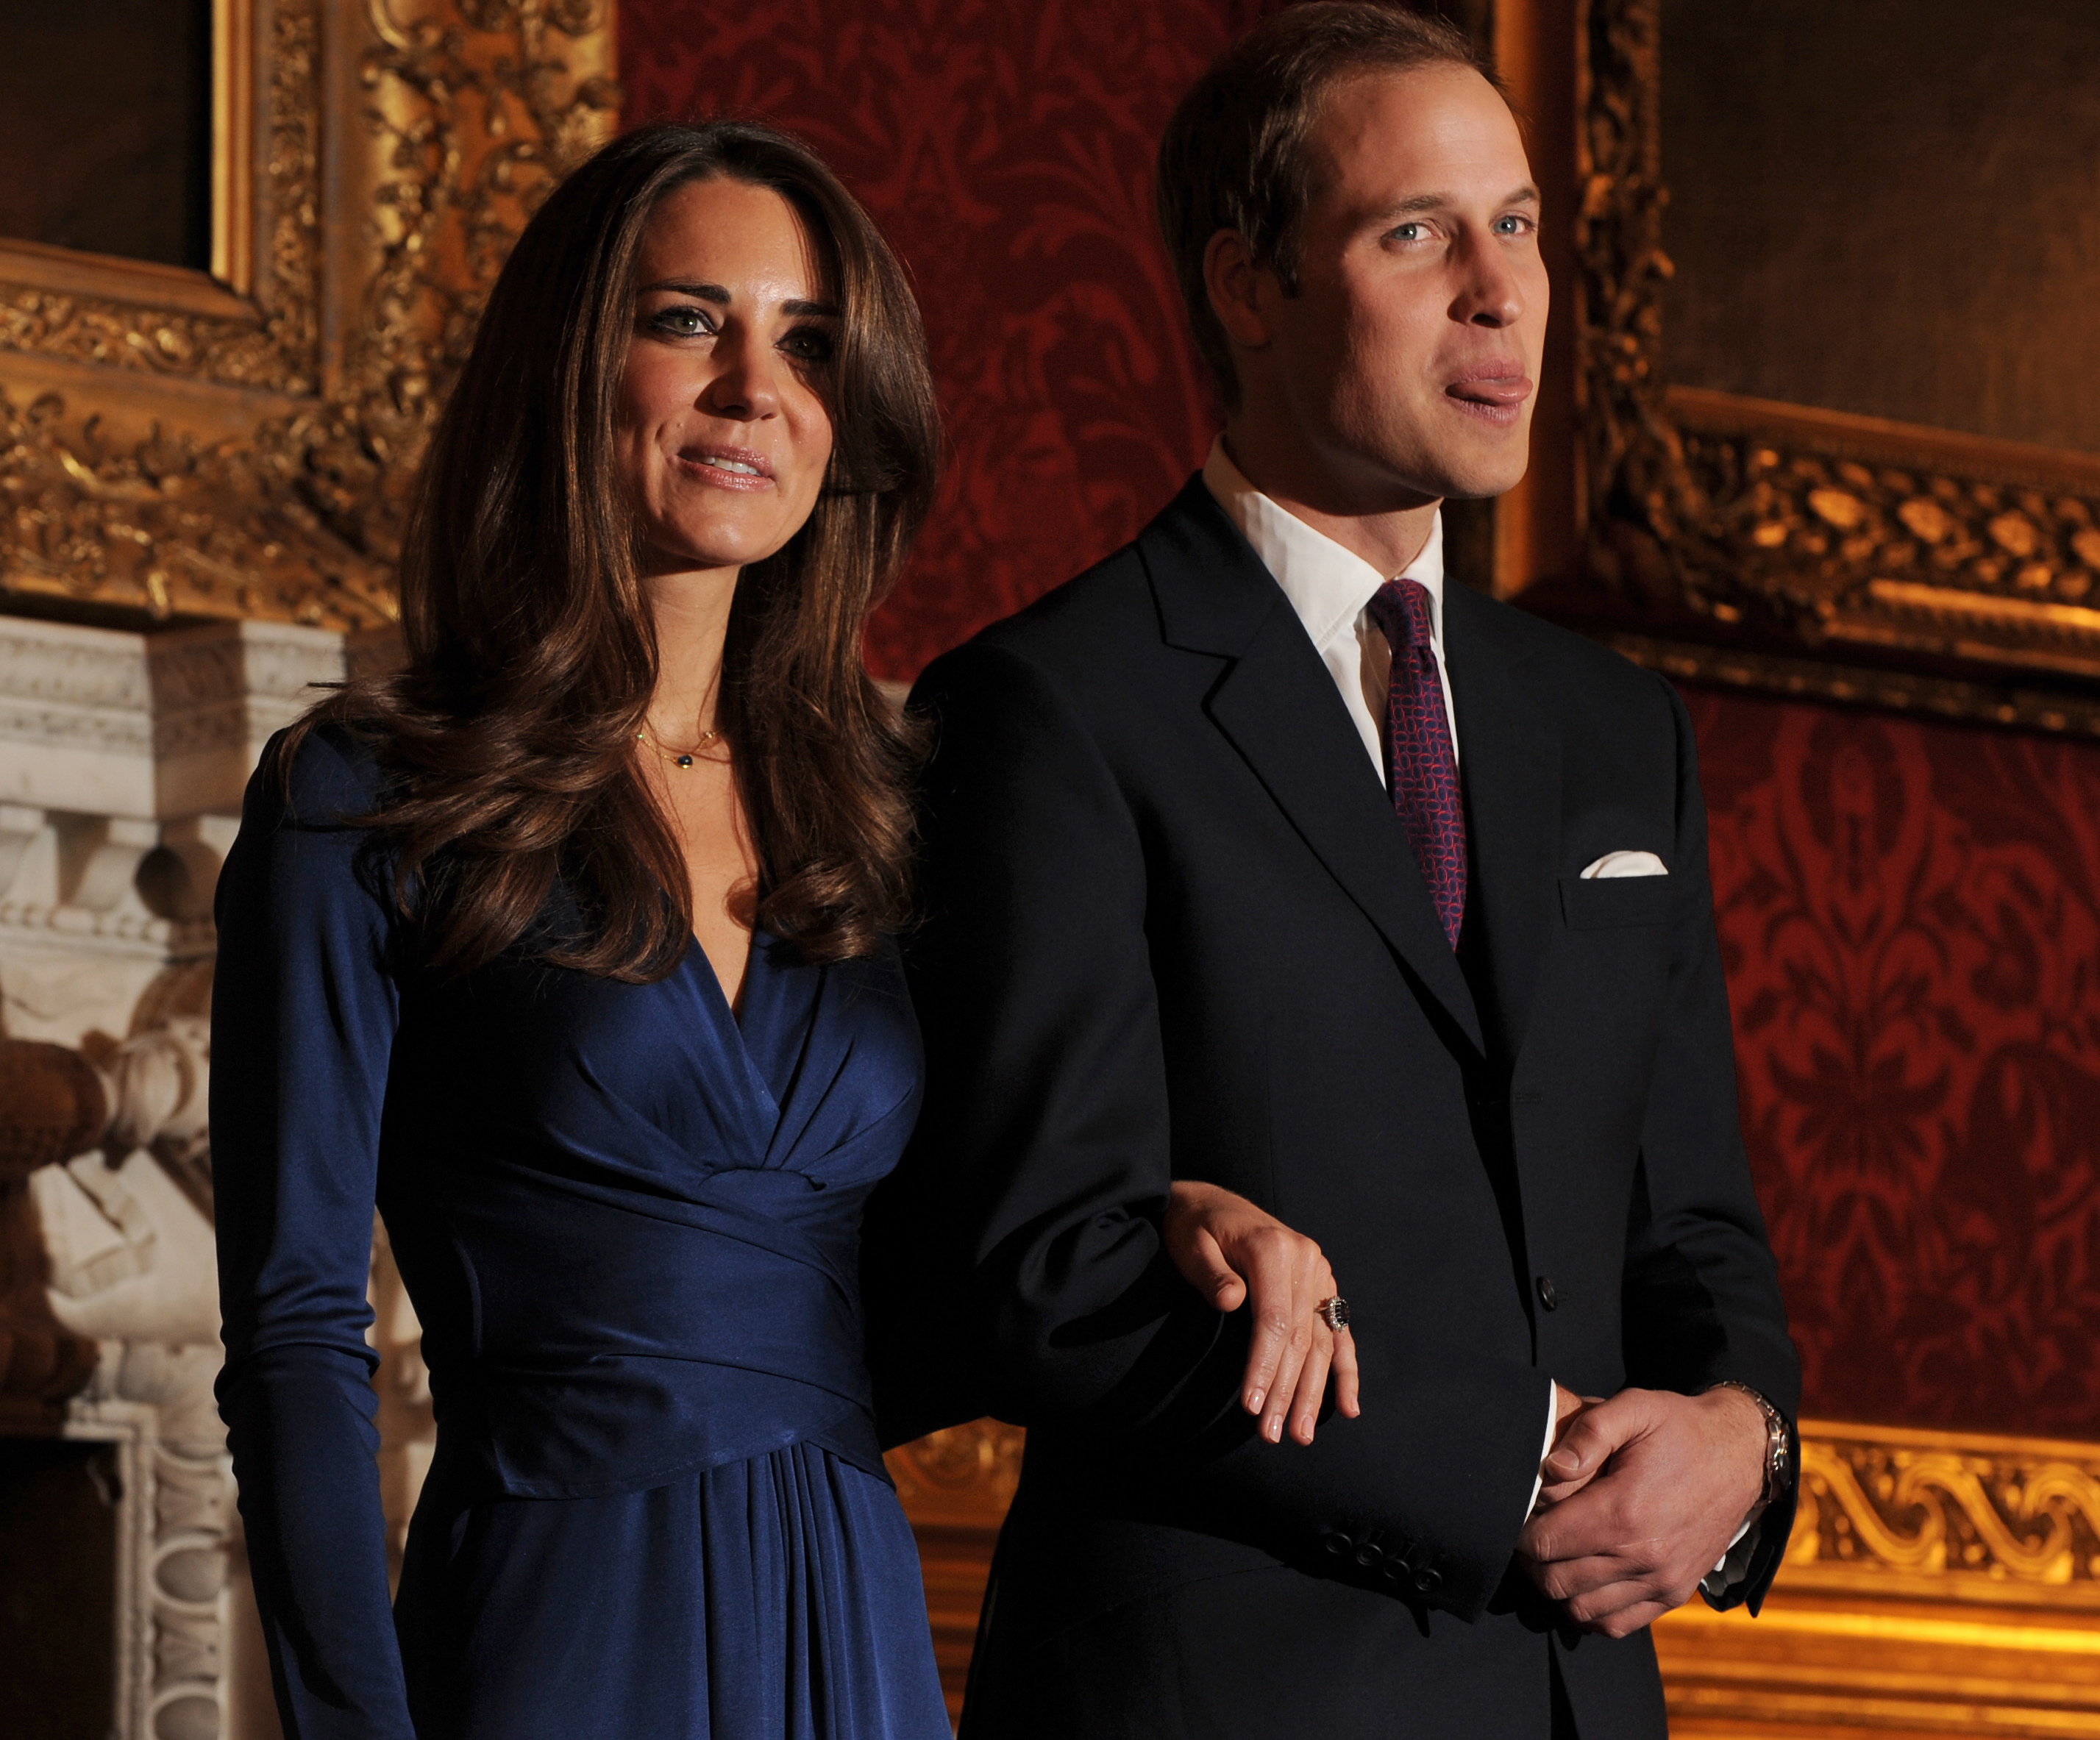 Britain's Prince William and his fiancée 